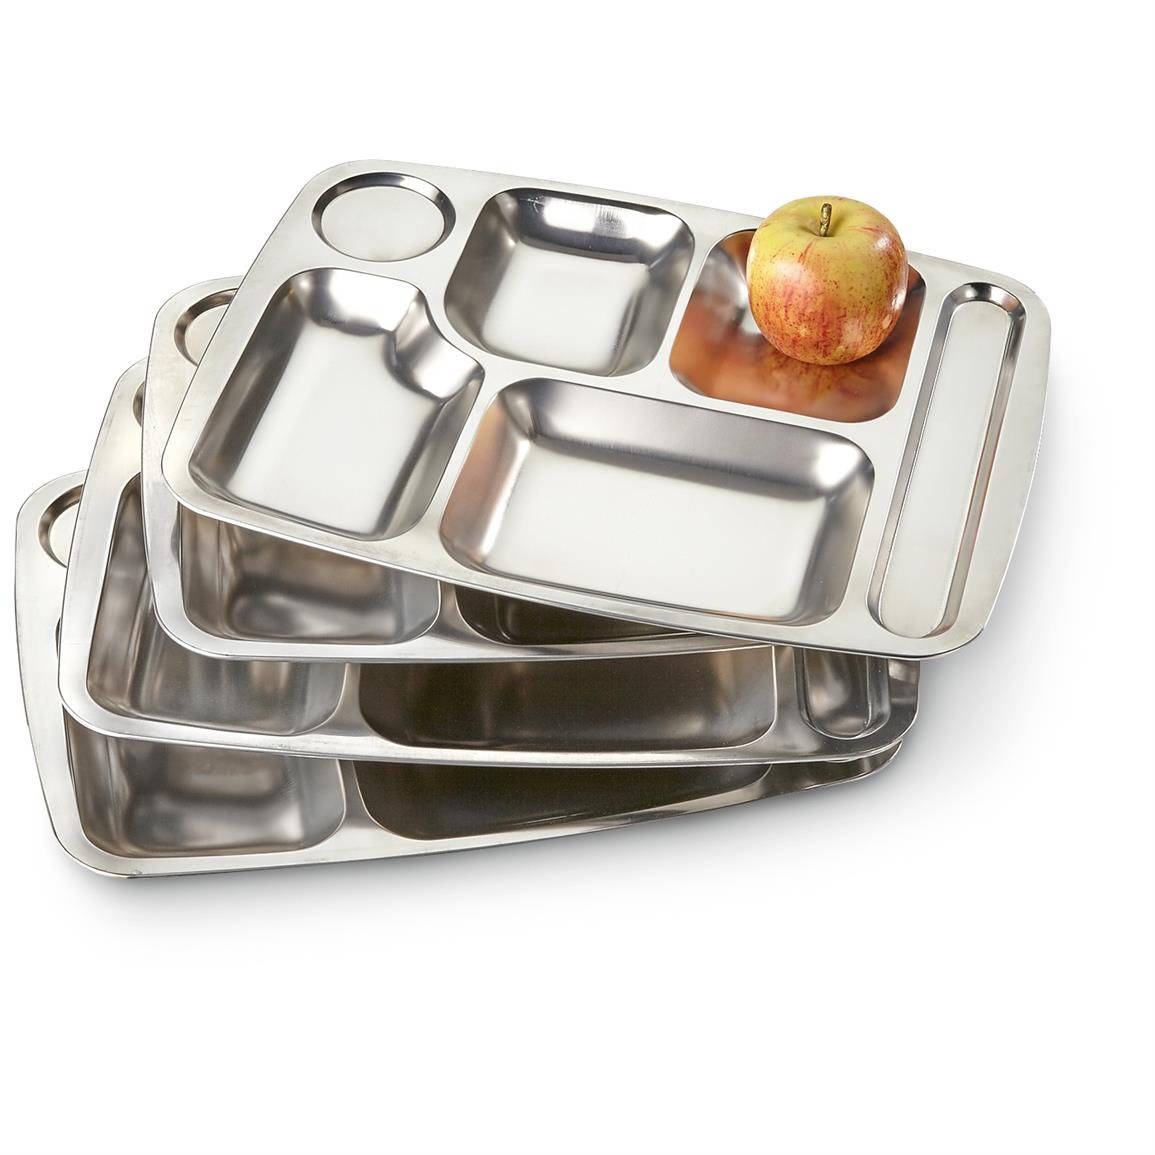 Military Style Stainless Steel Mess Trays